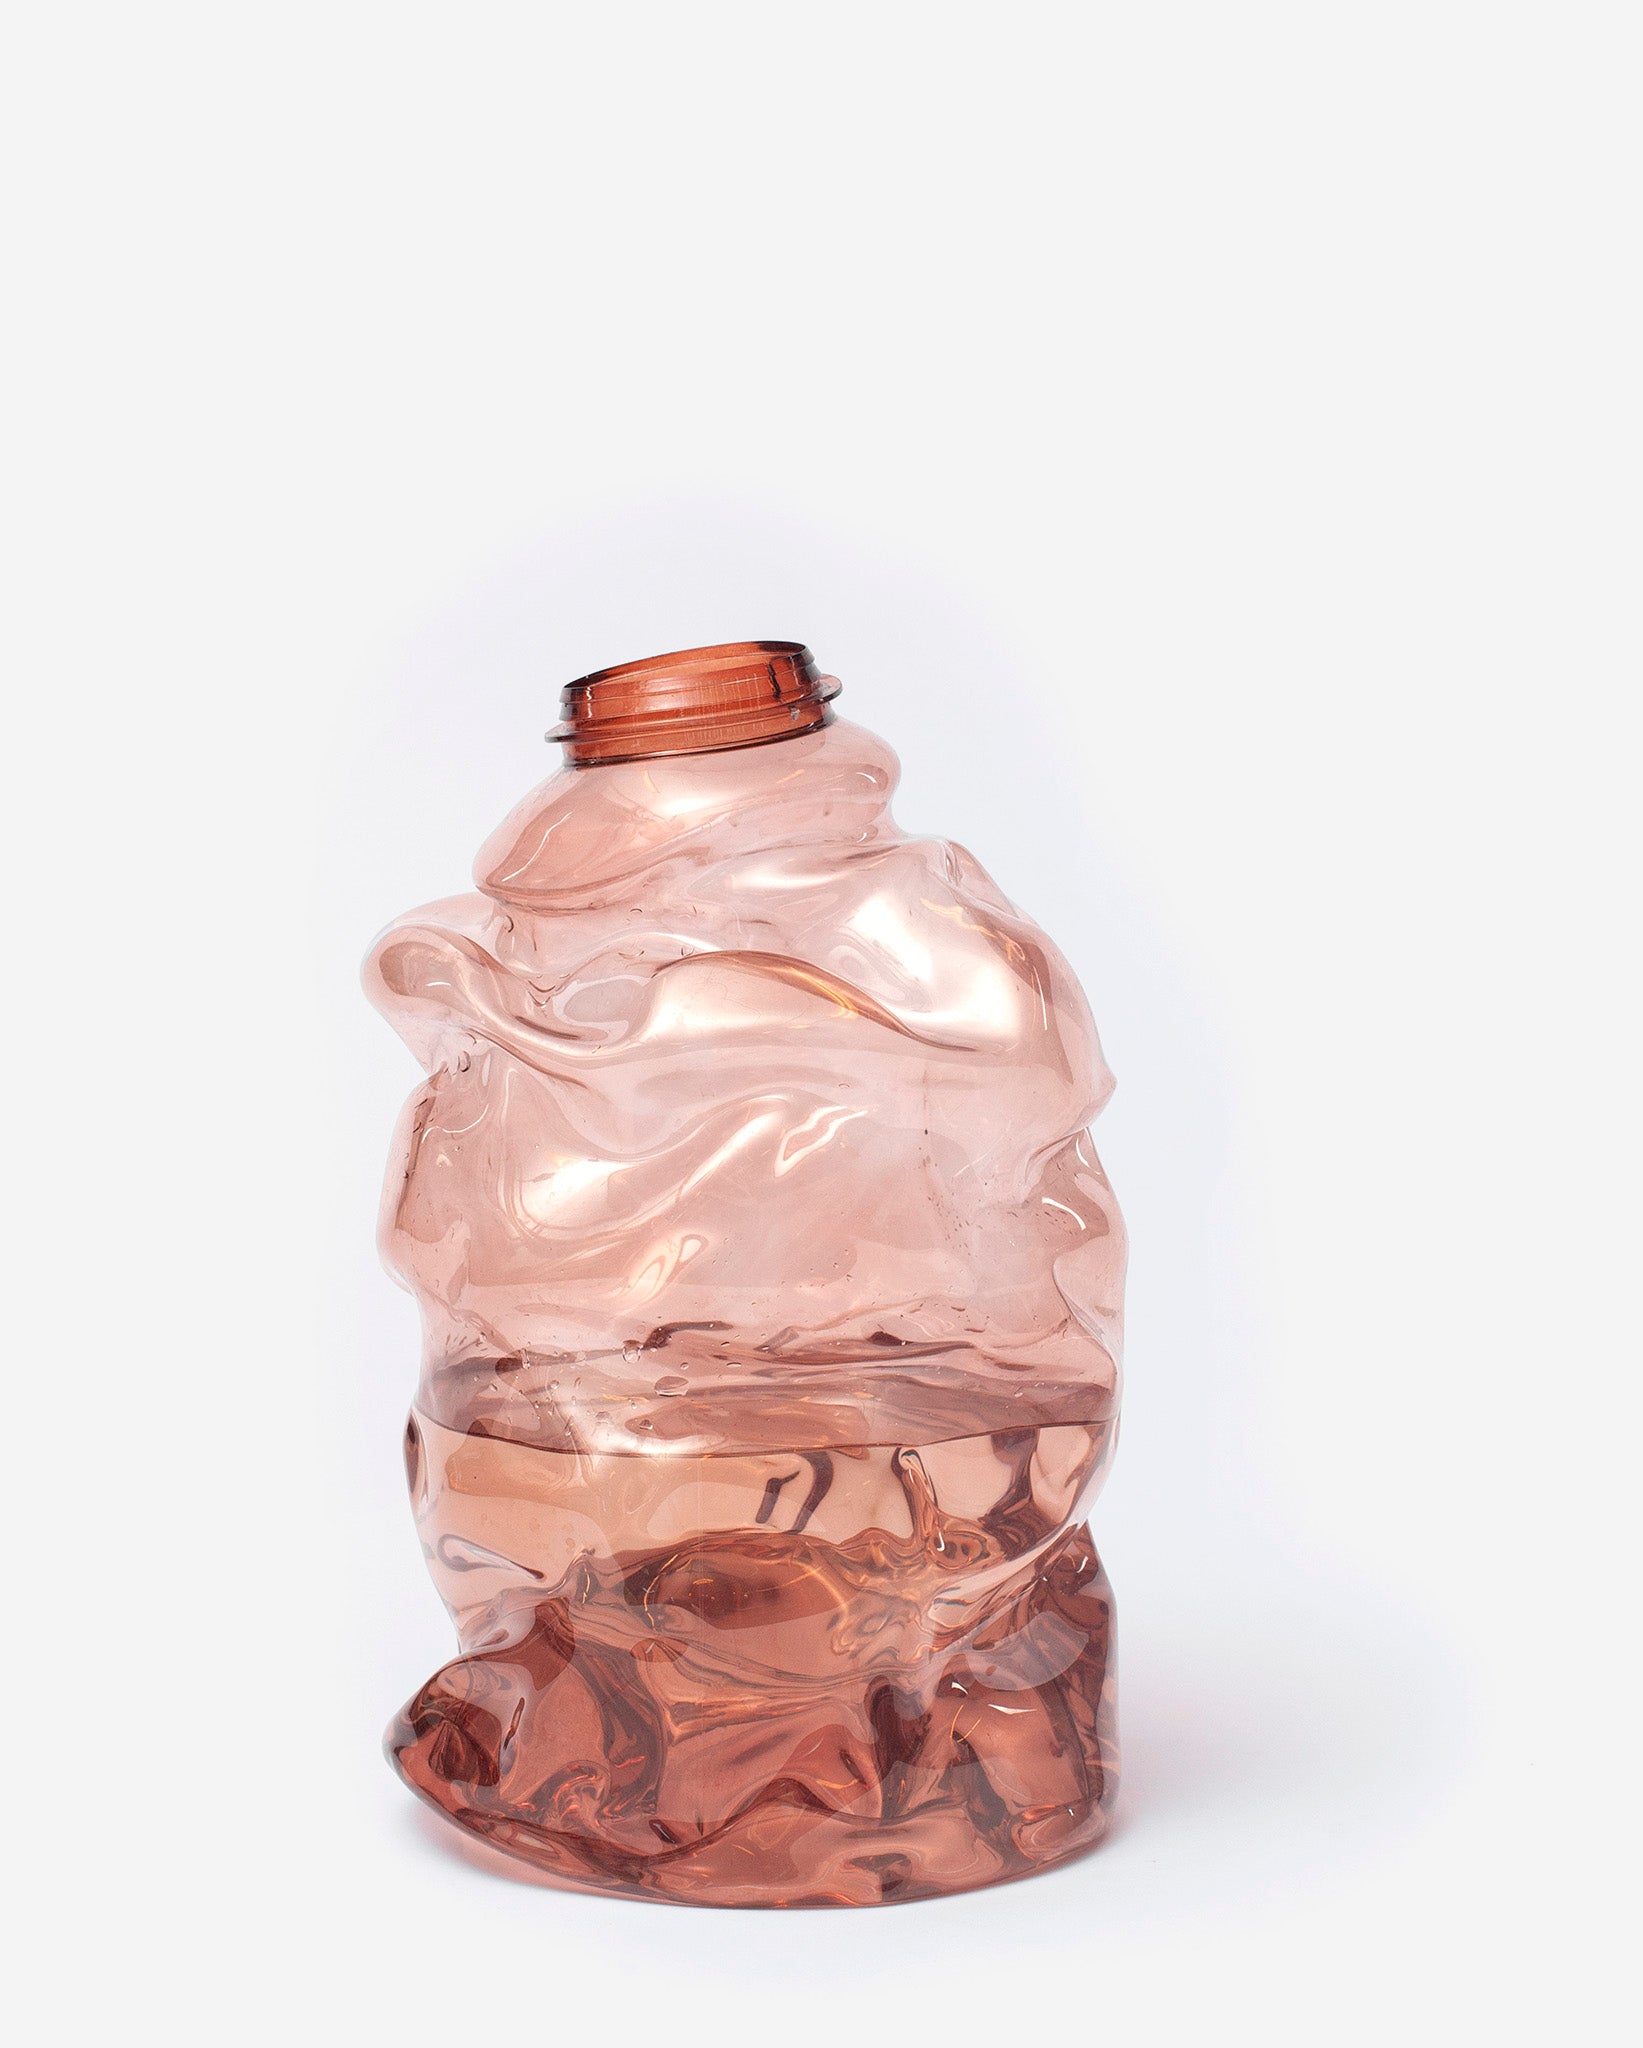 Large brown handmade recycled plastic vase on a white background